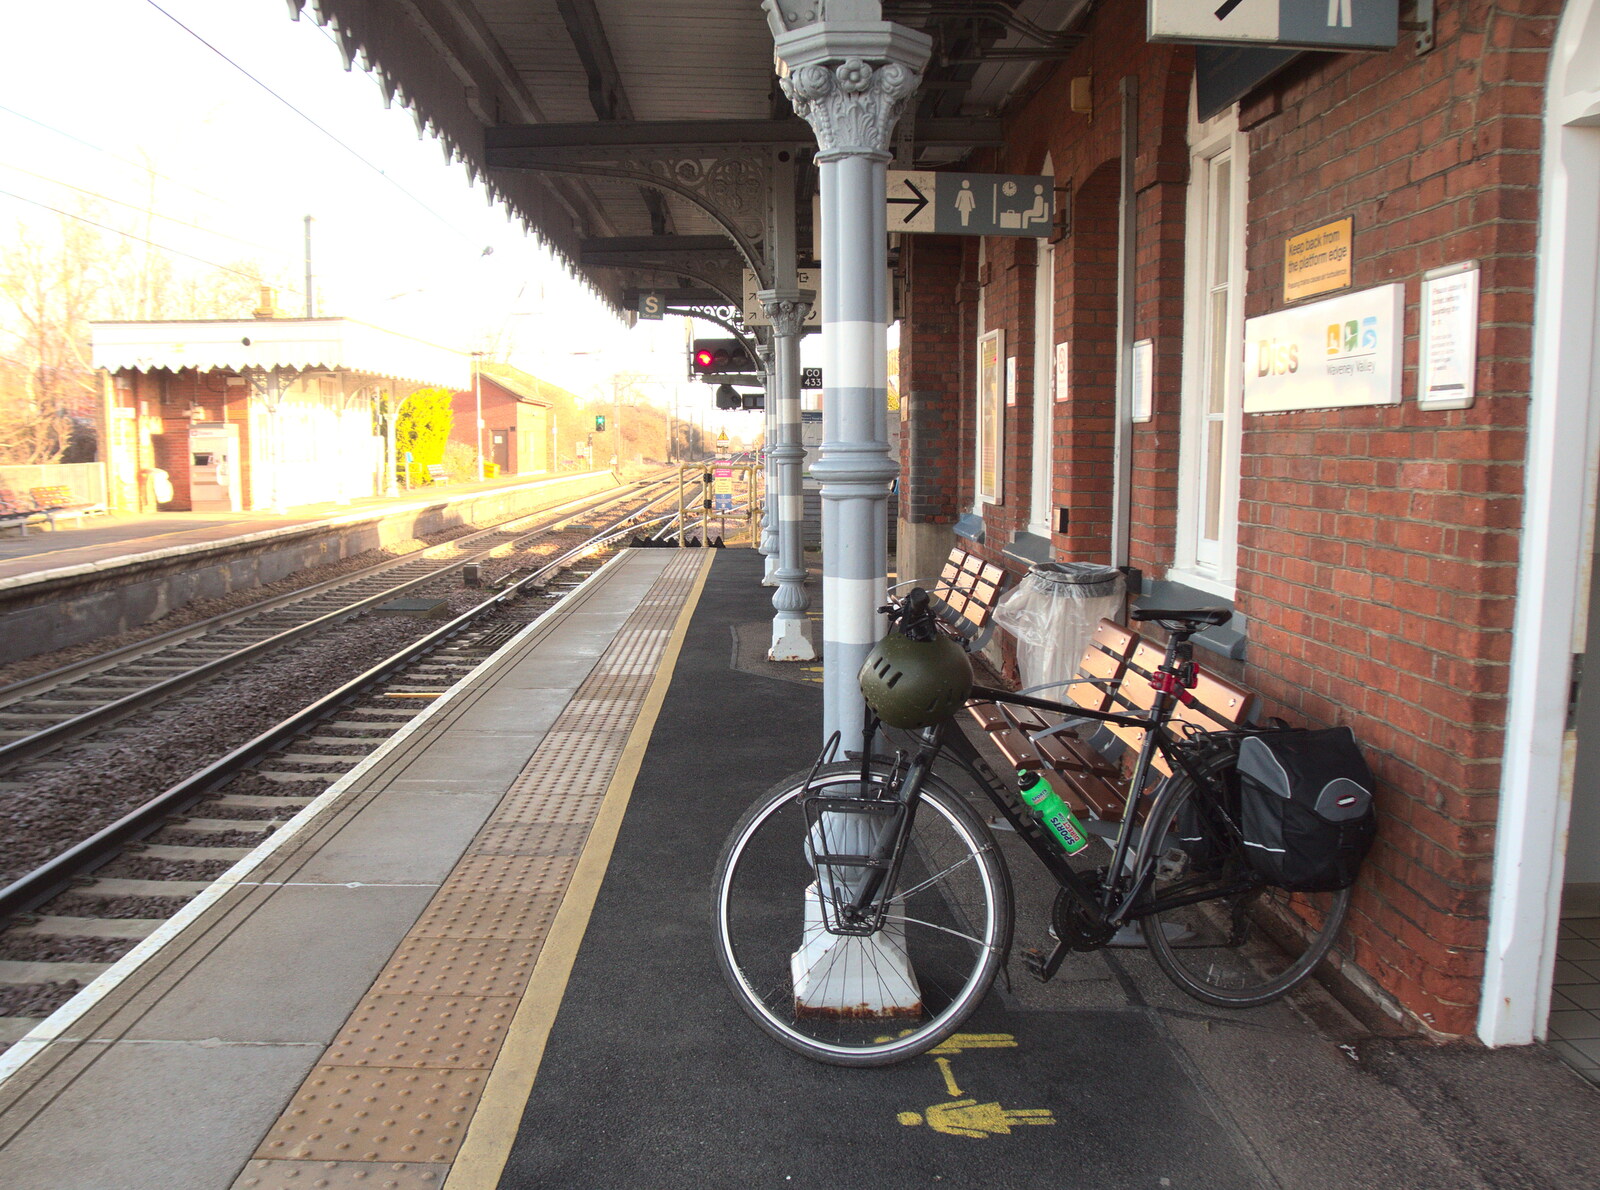 The bike's in its old spot at Diss Station from The Last Trip to the SwiftKey Office, Paddington, London - 23rd February 2022